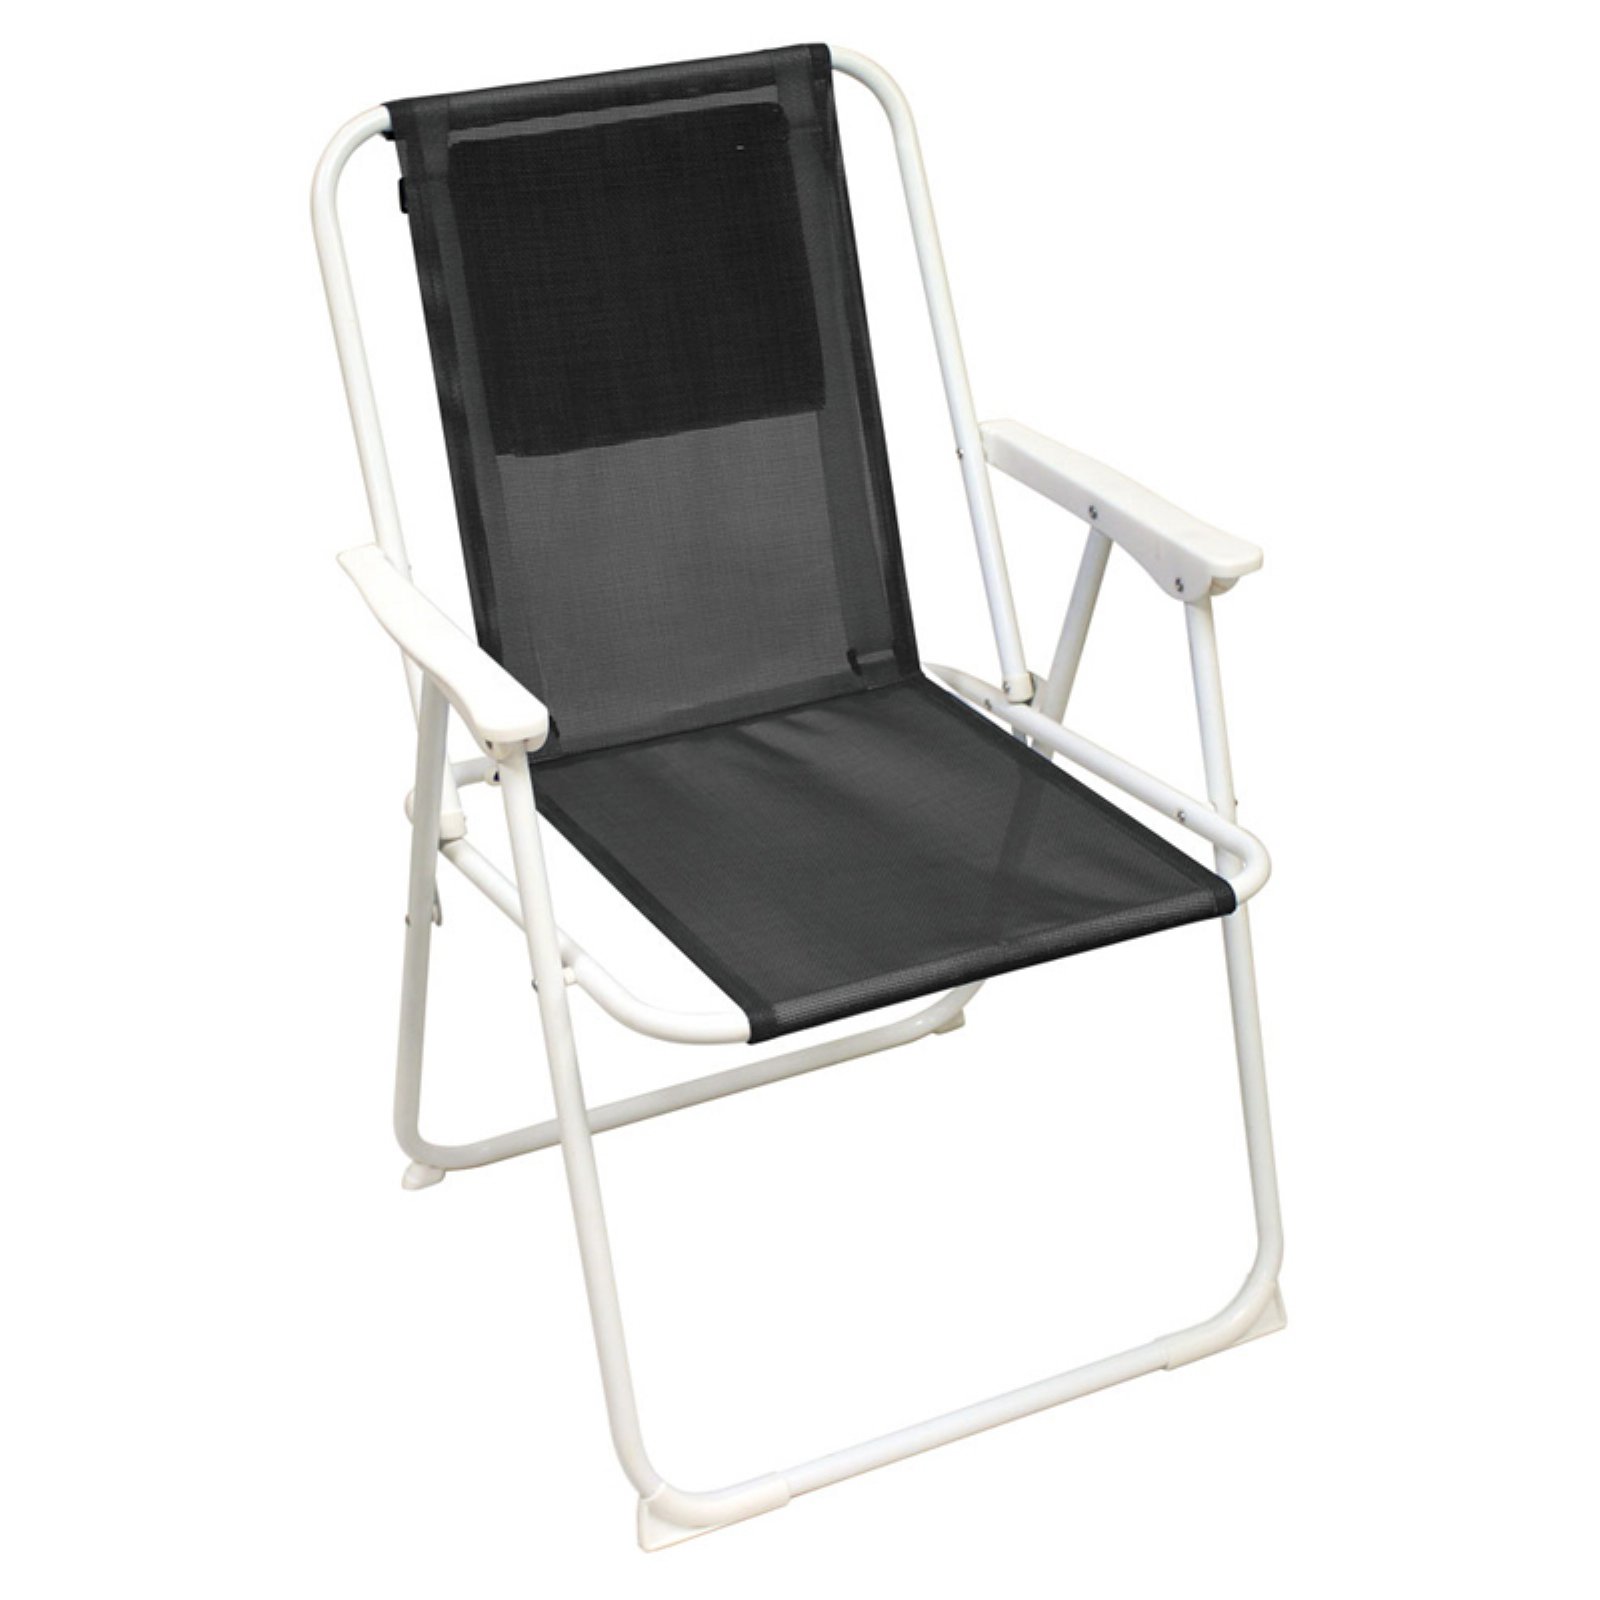 Preferred Nation Portable Beach Chair - image 2 of 3